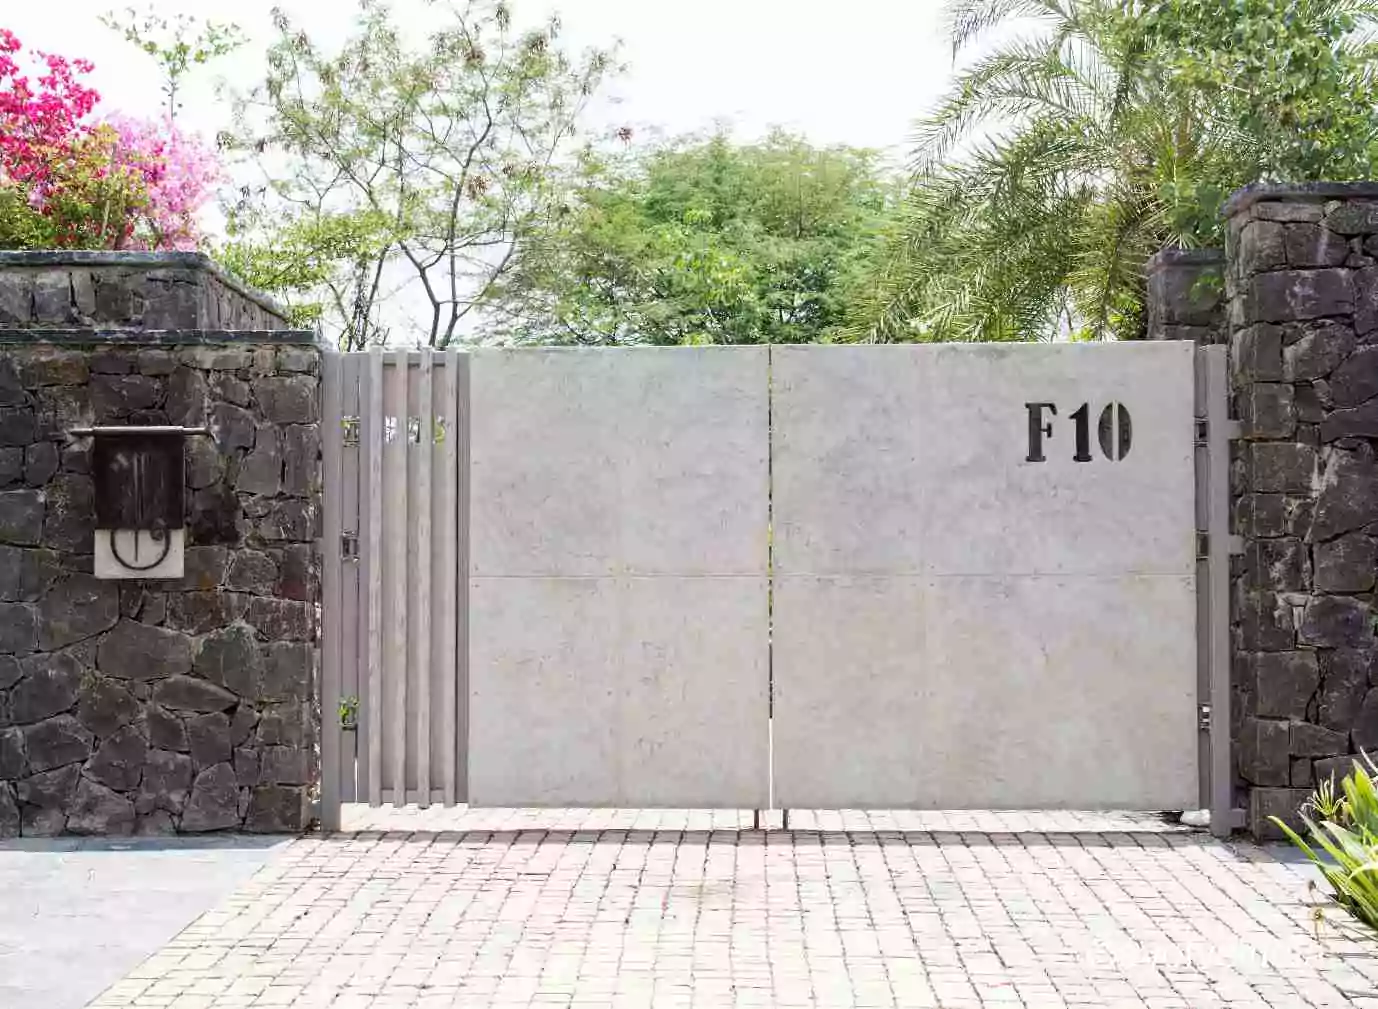 Exterior Wall Texture Design of A Residential Space done by Evolve India using decorative concrete finishes